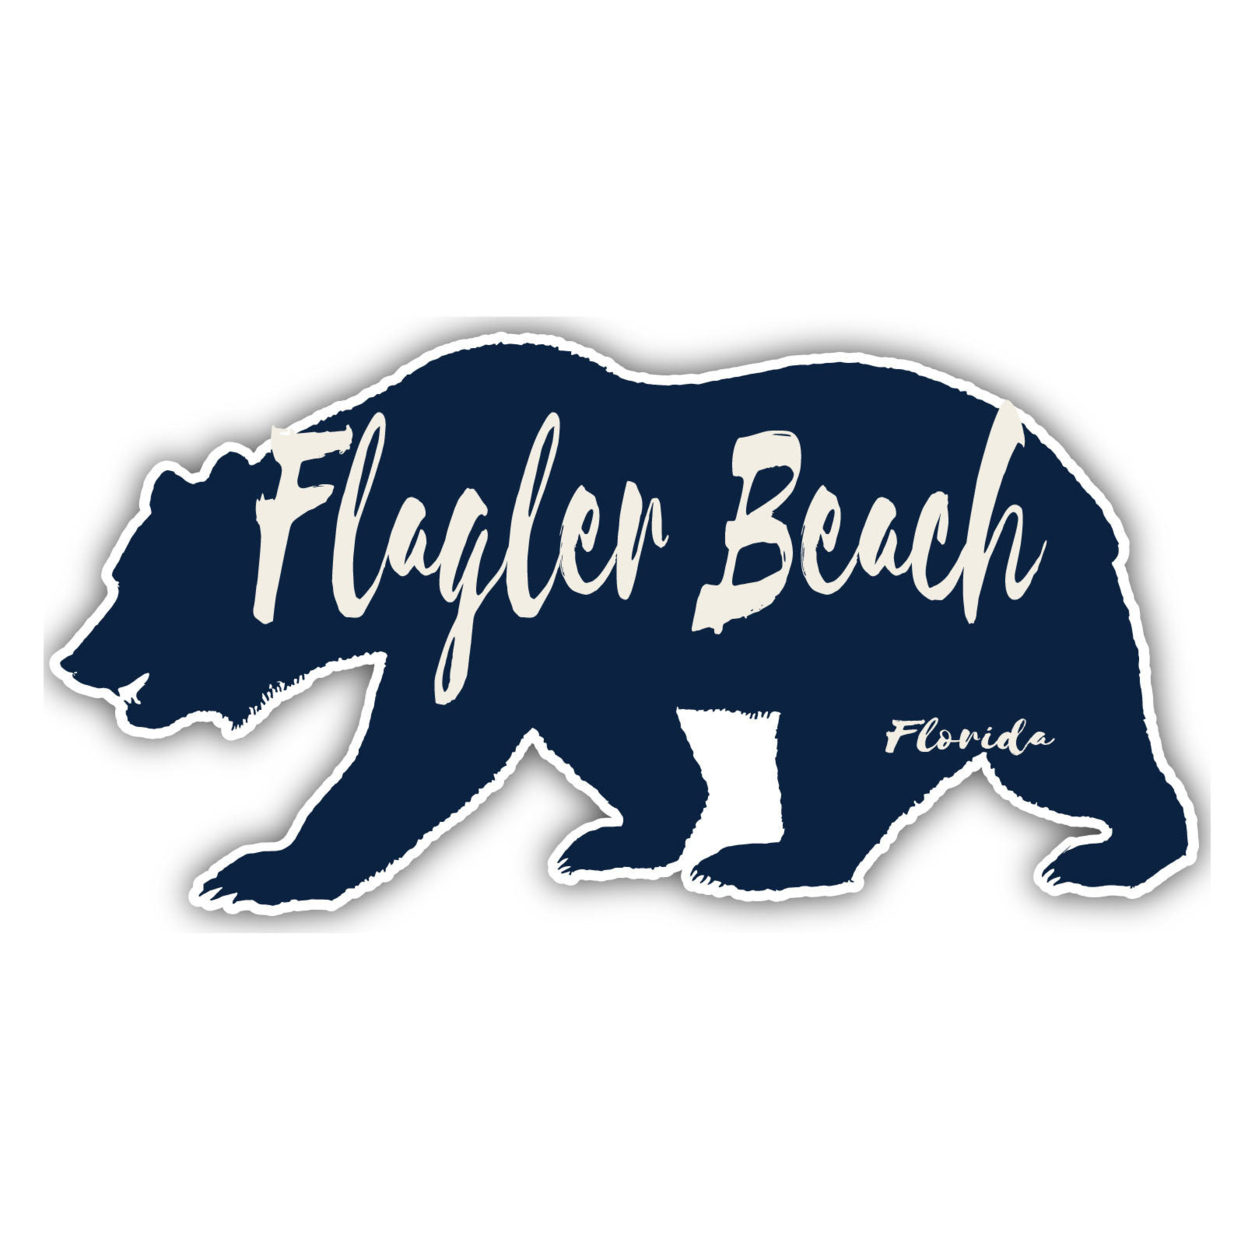 Flagler Beach Florida Souvenir Decorative Stickers (Choose Theme And Size) - 4-Pack, 6-Inch, Tent